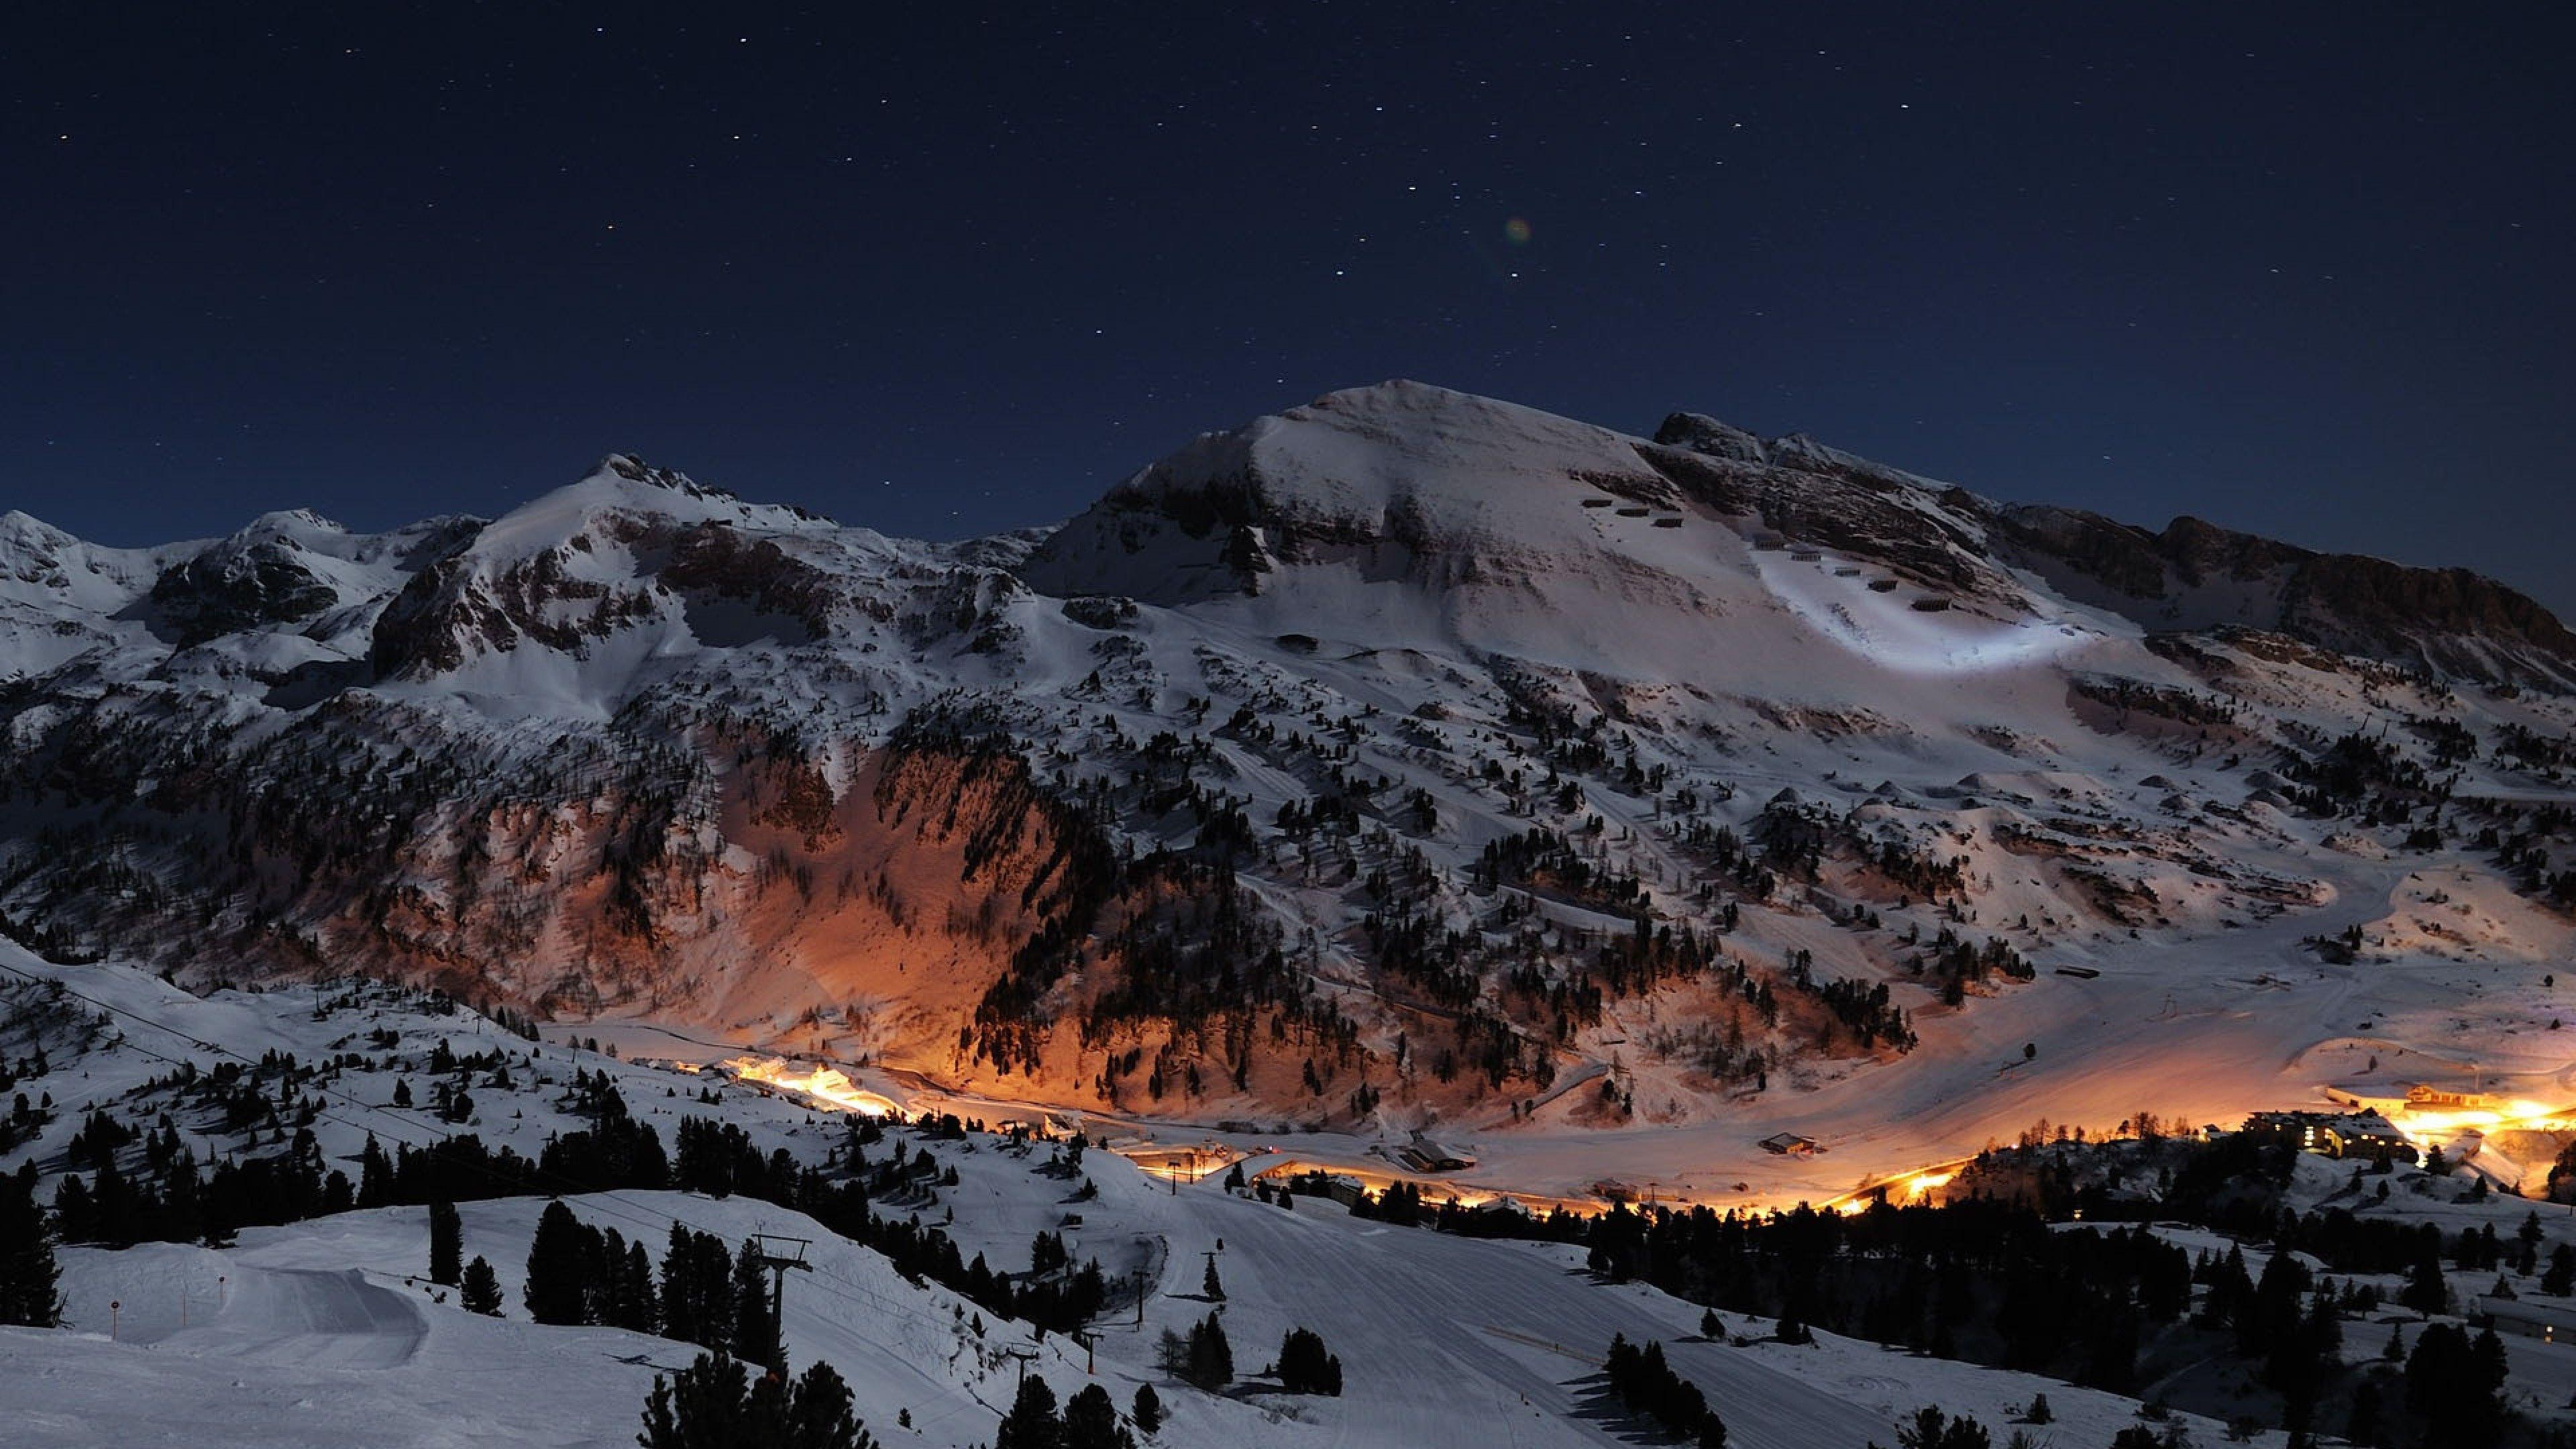 Night Star Alps. Mountains at night, Mountain picture, Mountain wallpaper